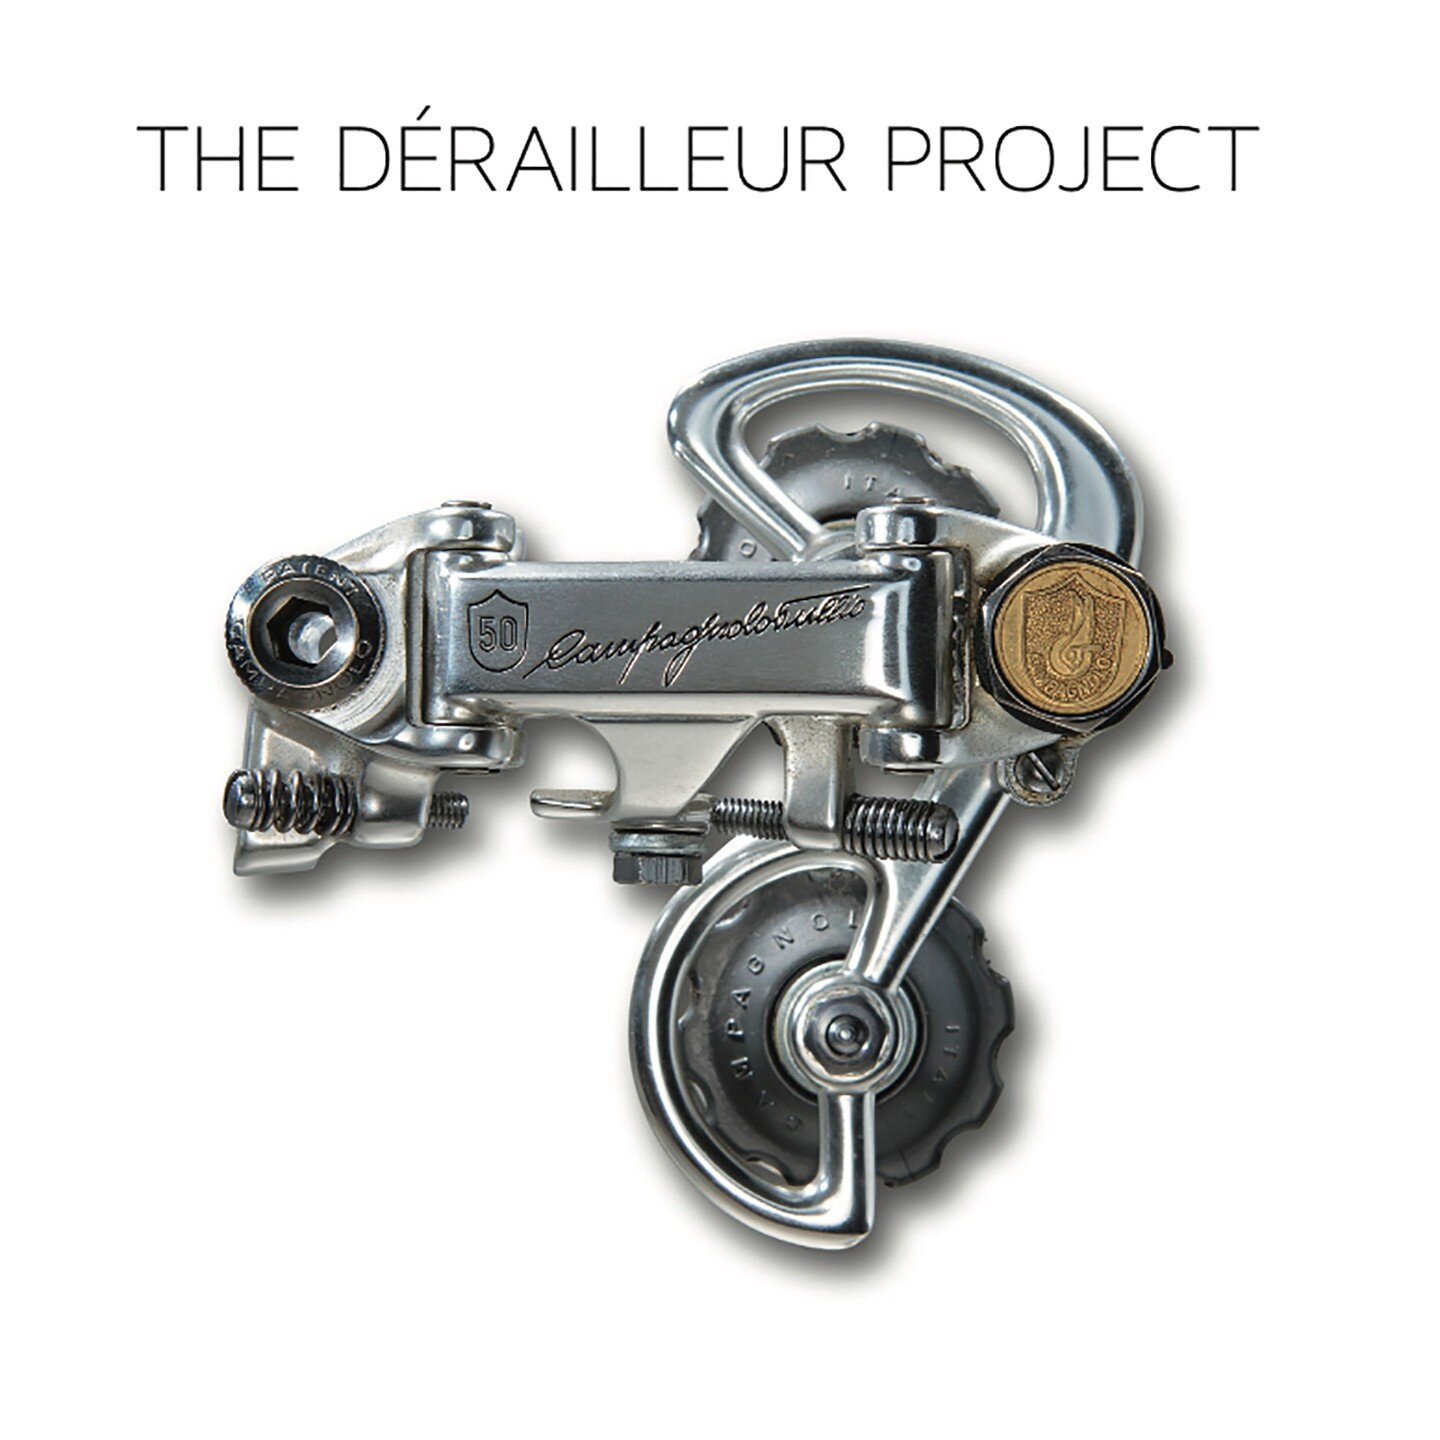 All nine of the Campagnolo d&eacute;railleurs featured in The Derailleur Project Book are also available as prints!

This one is my favorite! Campagnolo Super Record 50th Anniversary Model. It's from grouppo number 7088 of approximately 15K that were